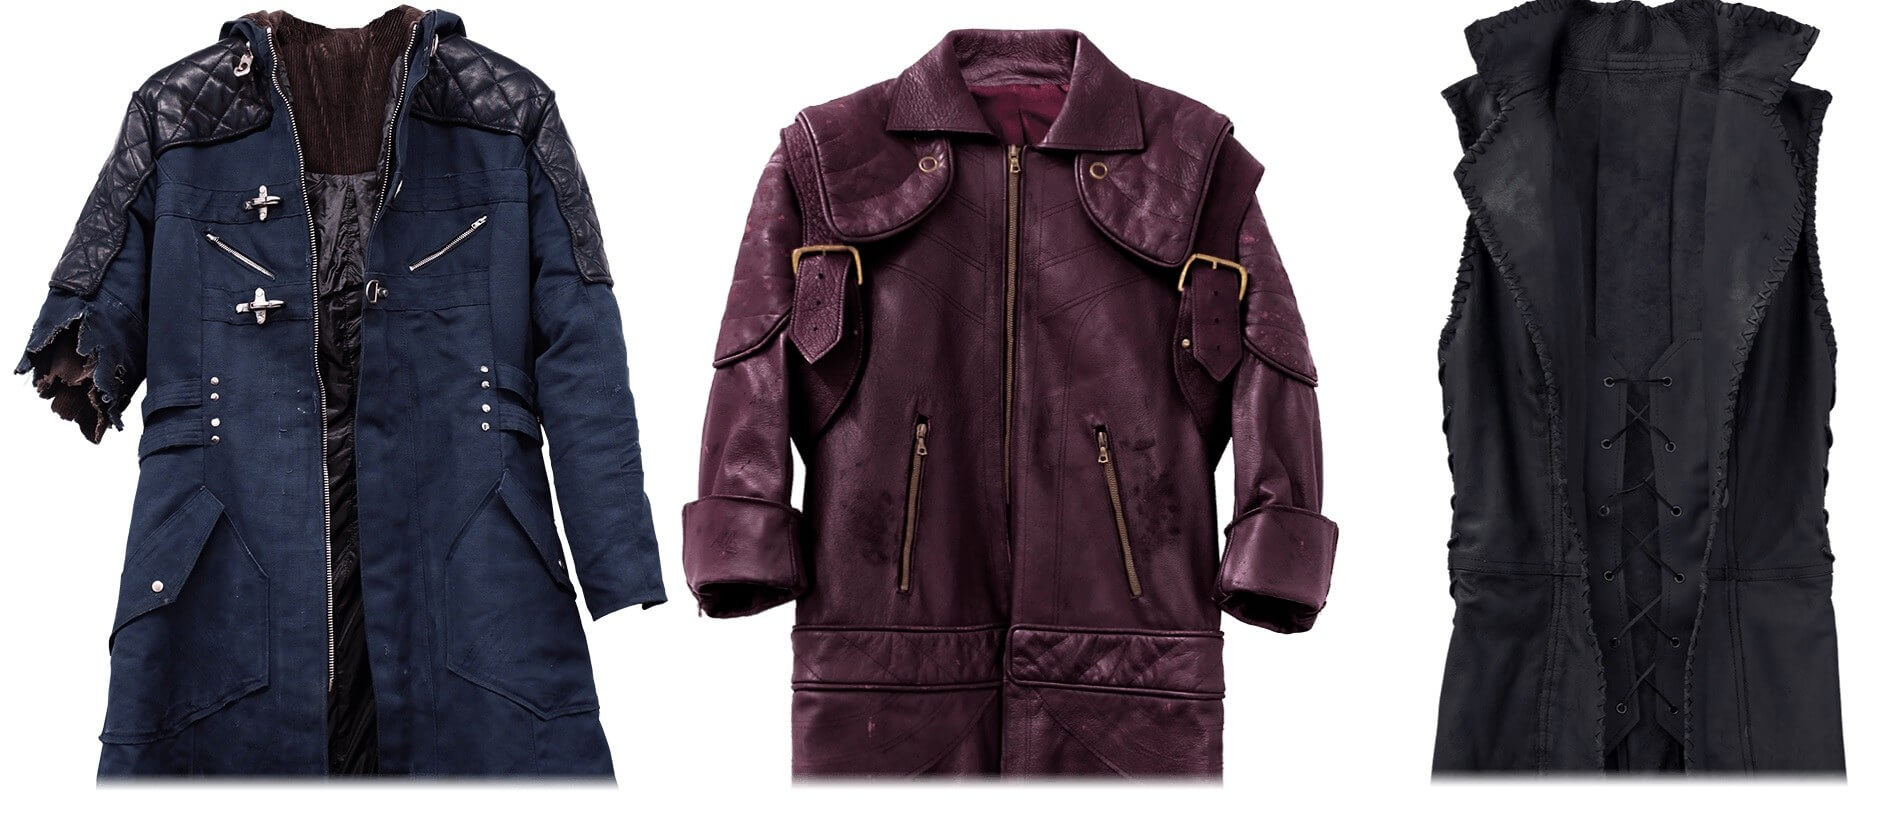 Ultra Limited Edition of Devil May Cry 5 comes with Dante's jacket, costs $8,000